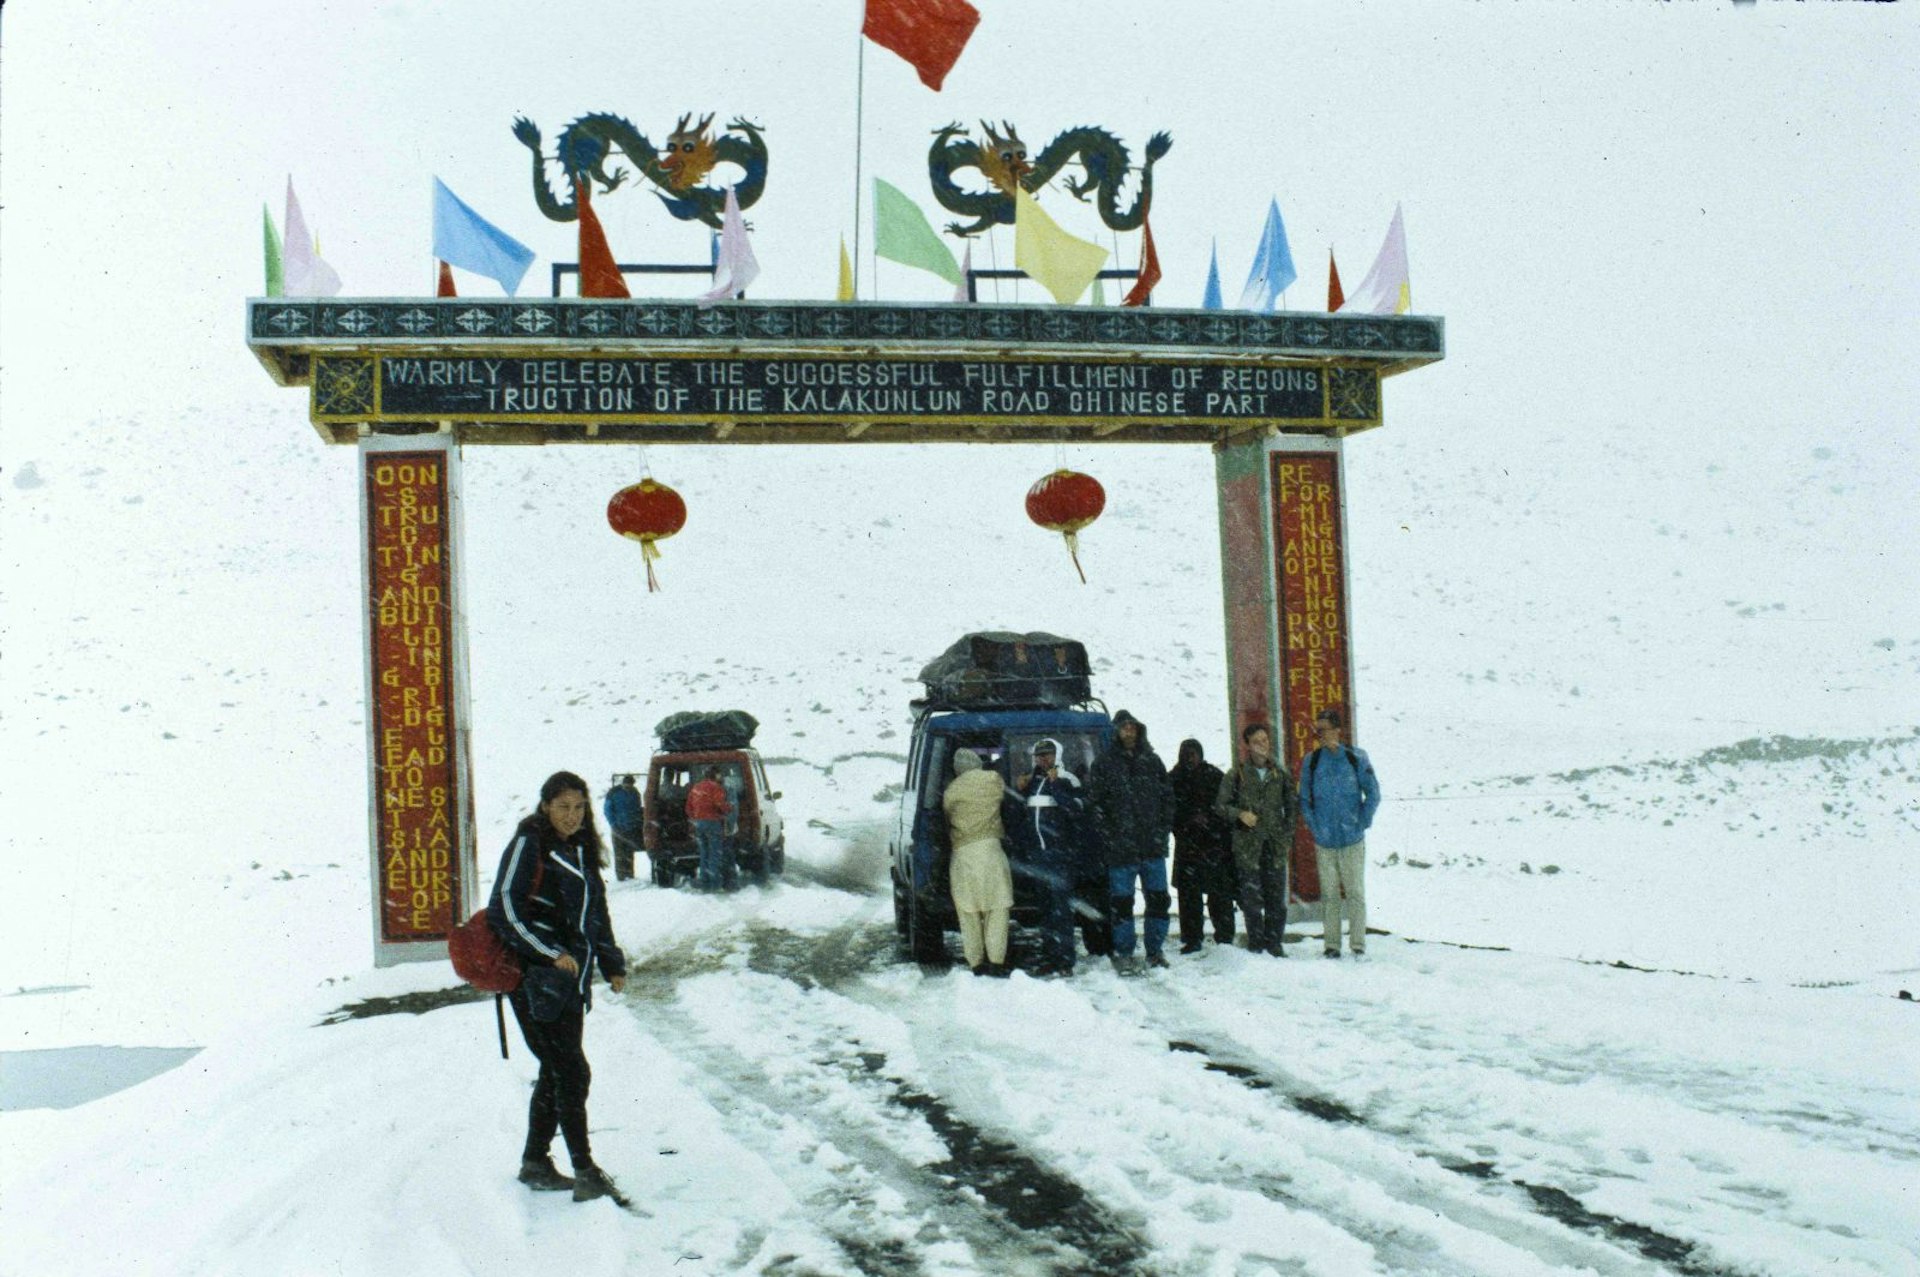 A woman stands in front of the Khunjerab Pass. An ornately decorated entrance straddles the snow-covered road. Two cars are behind her, one stopped under the entrance and one just the far side of it. People are standing around both vehicles in heavy clothing.